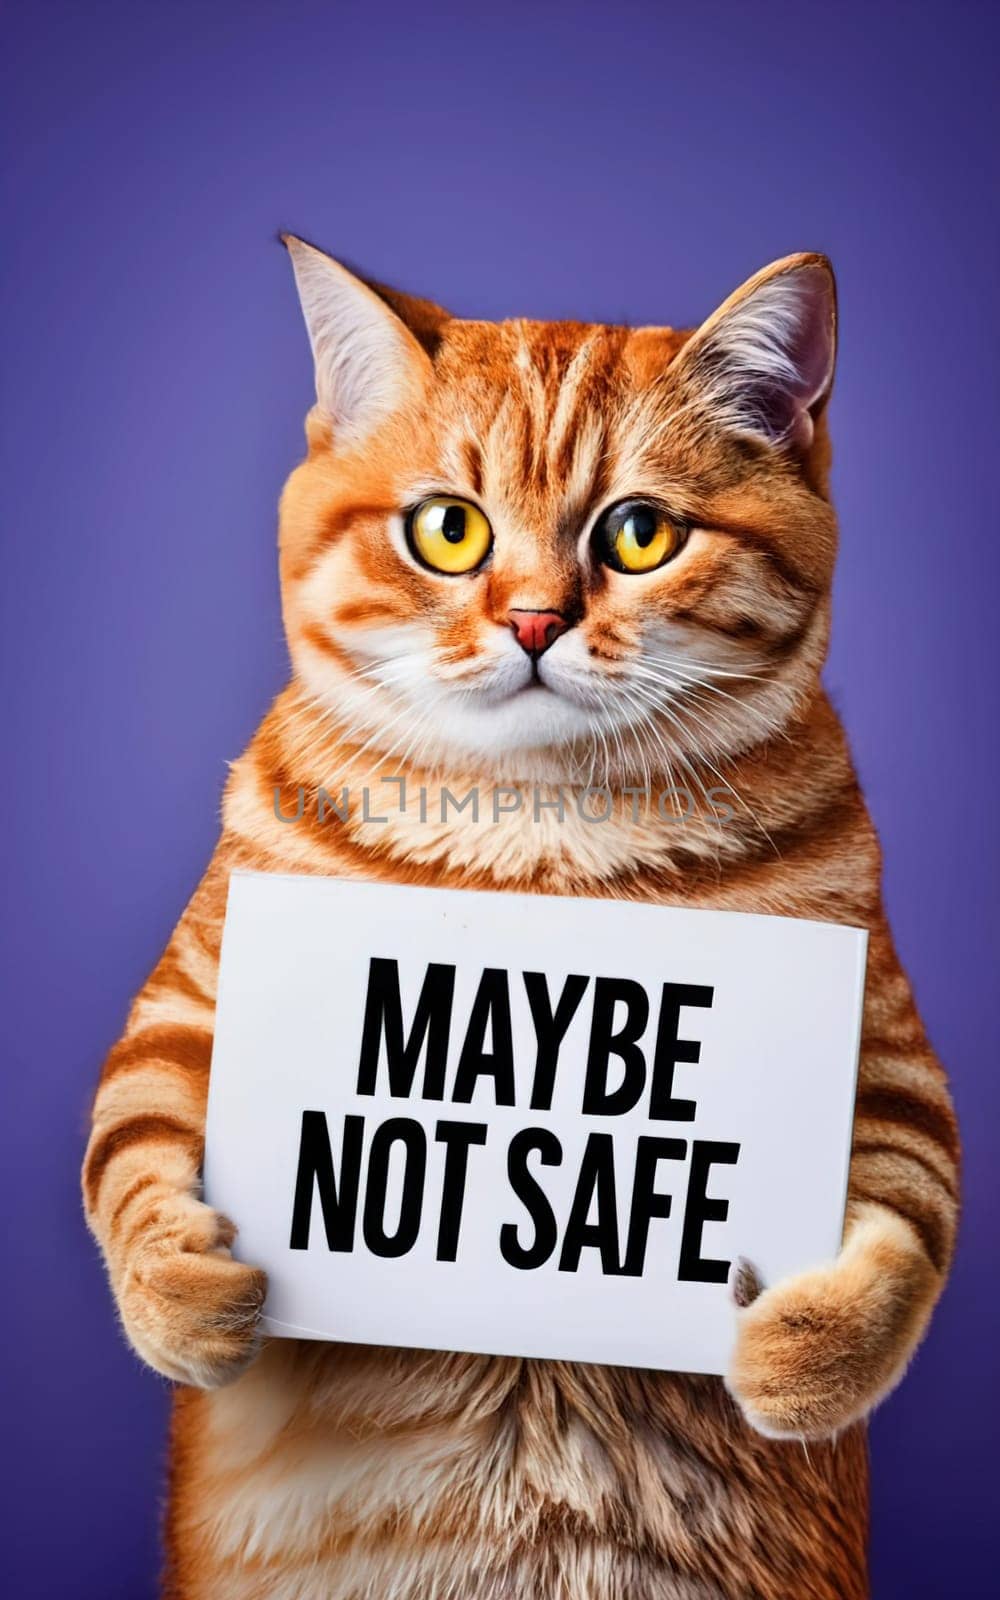 Cat Holding Warning Sign - 'Maybe Not Safe' Message - Humorous and Cautious Cat Illustration by igor010